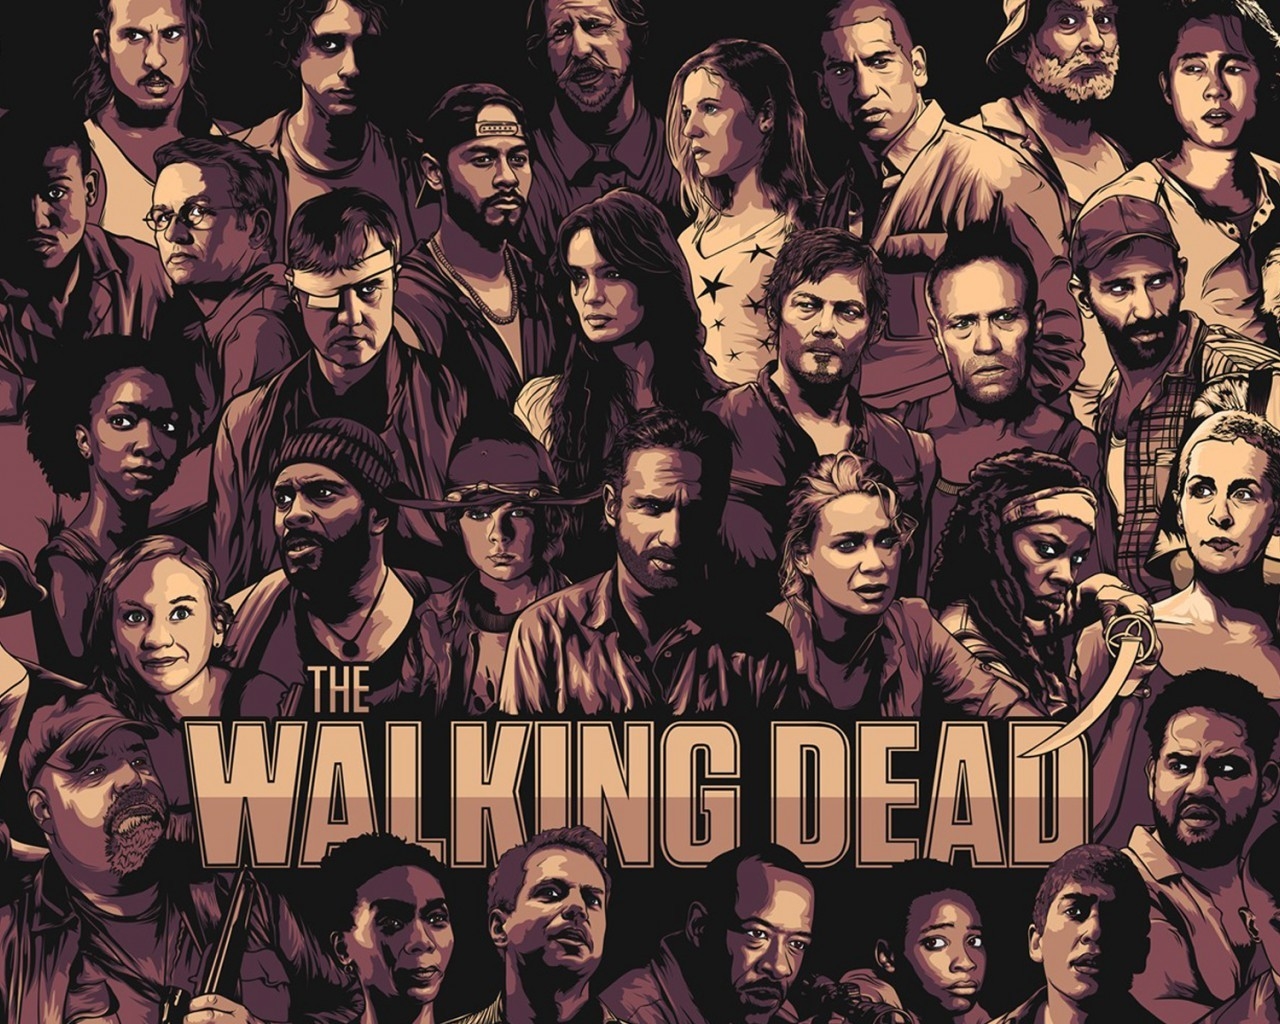 The Walking Dead Cool Poster for 1280 x 1024 resolution